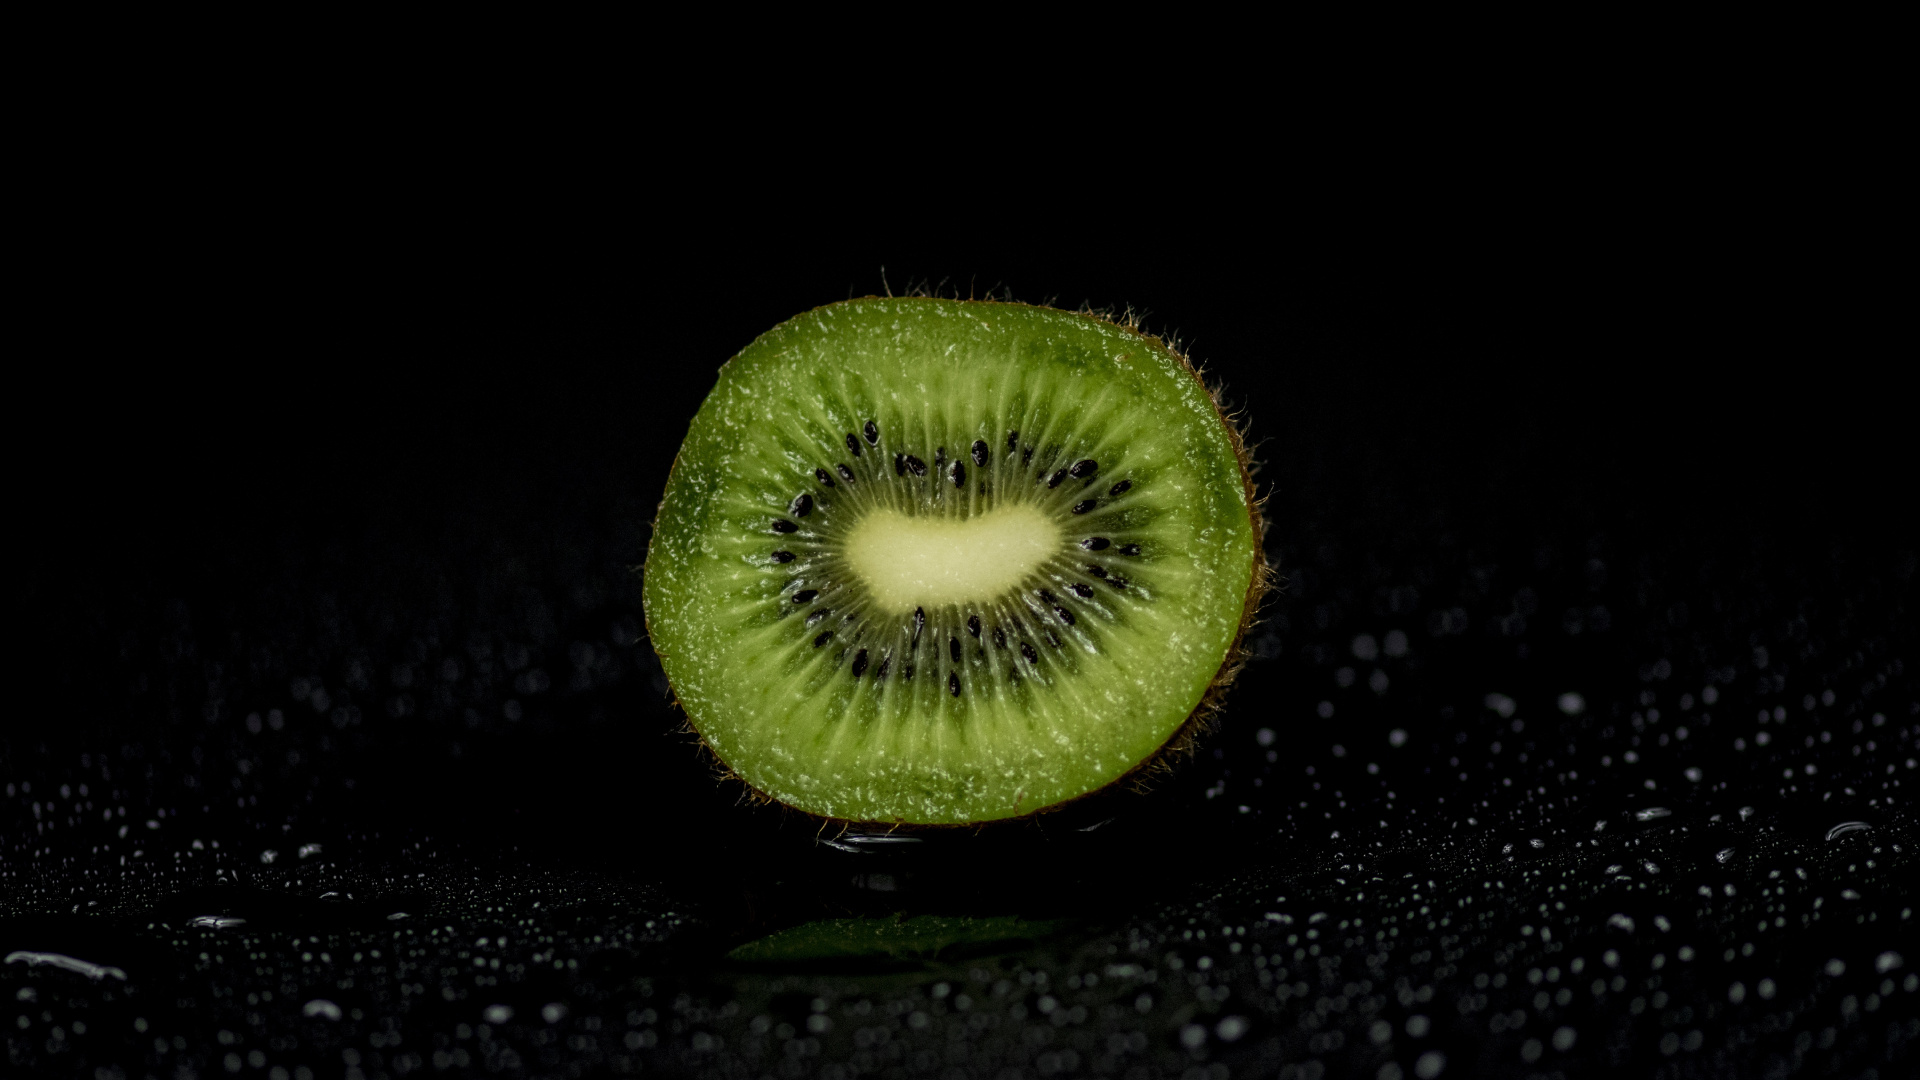 Green Round Fruit on Black Surface. Wallpaper in 1920x1080 Resolution